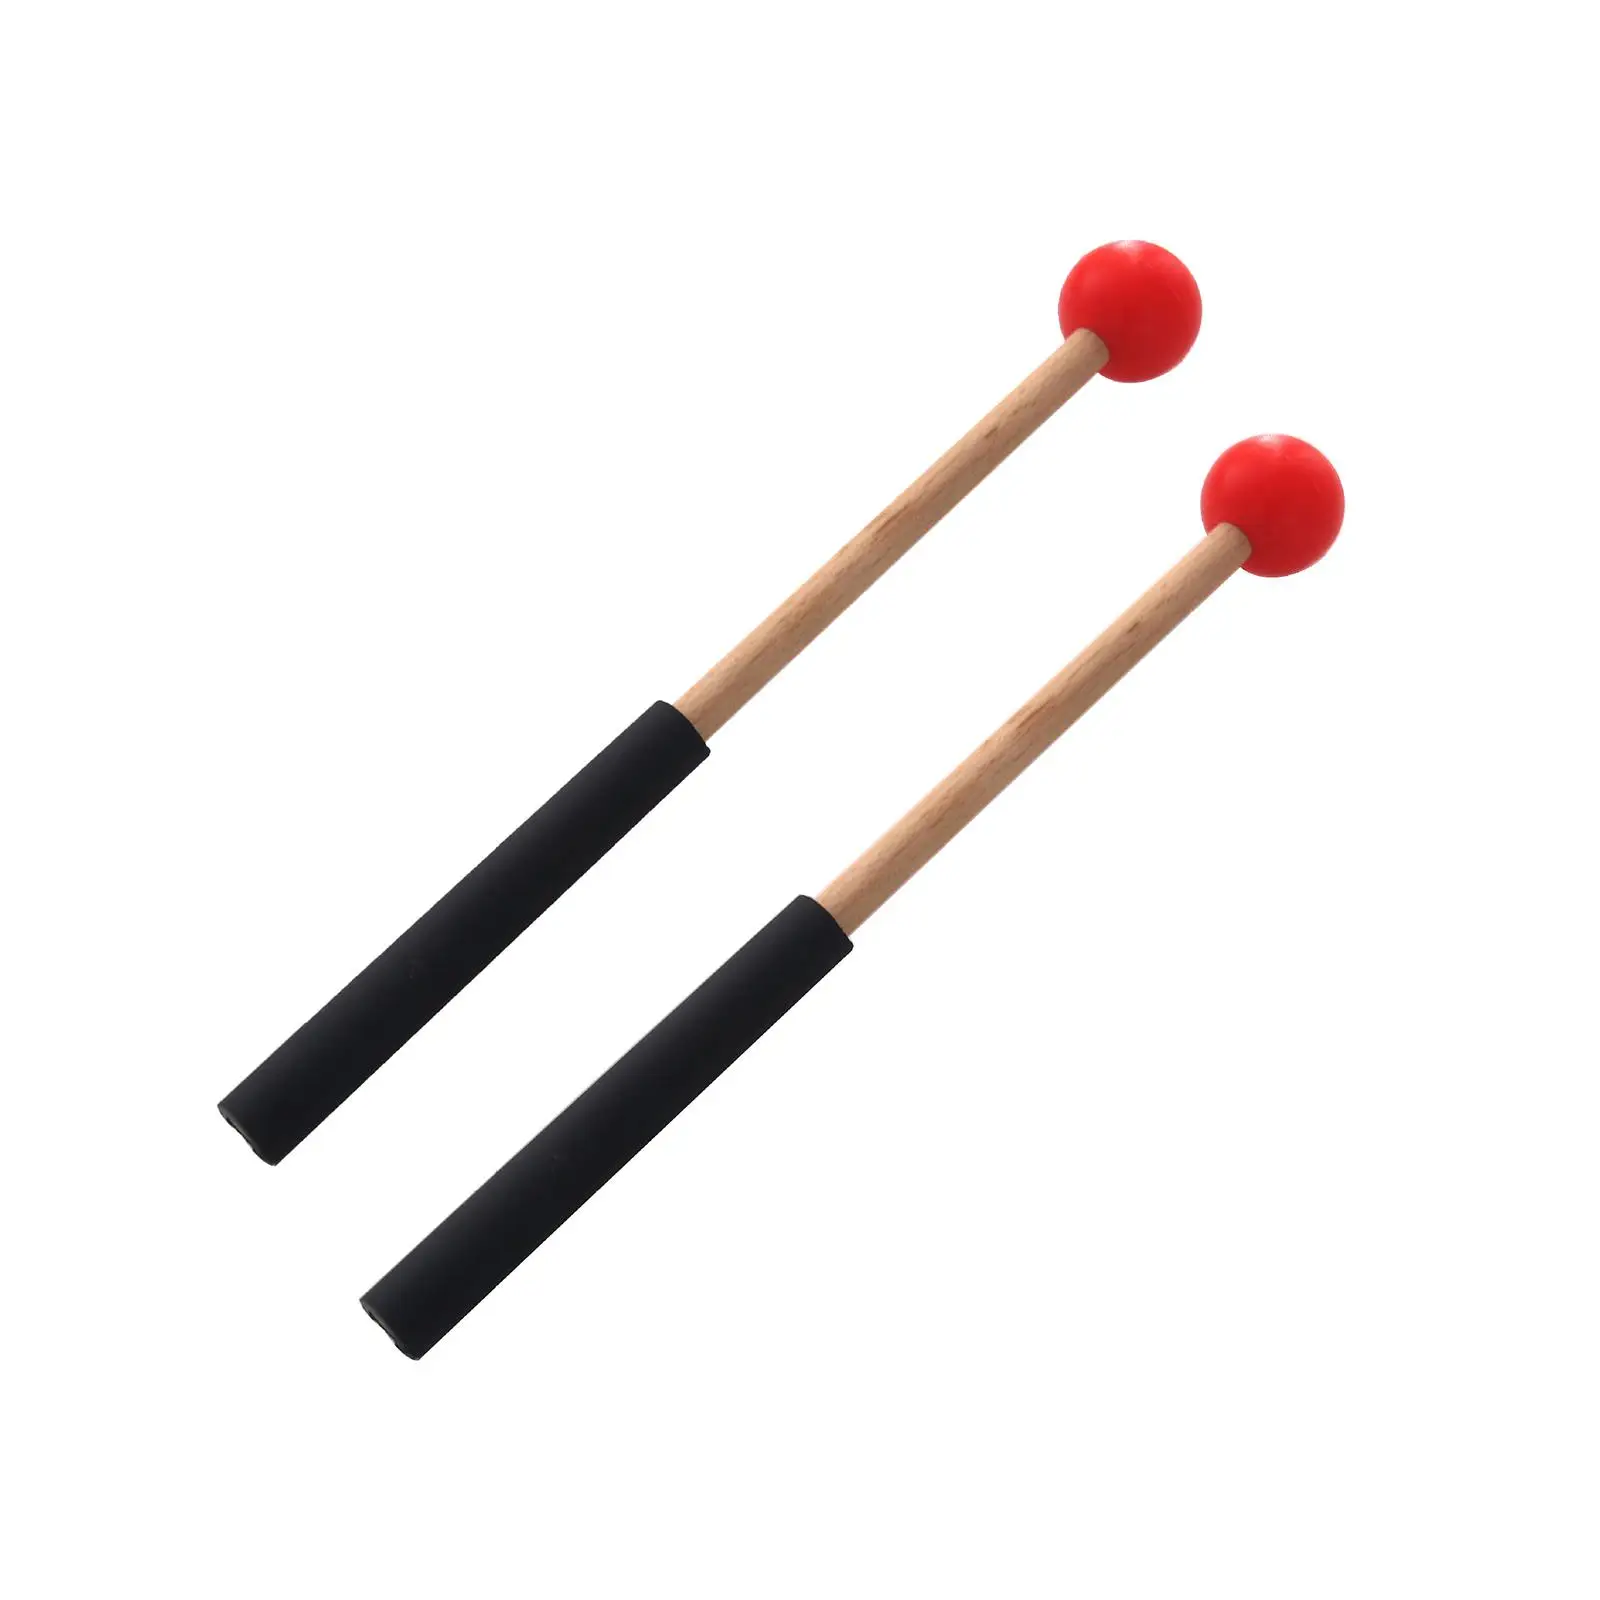 2 Pieces Wood Percussion Sticks with Wood Handle for Music Education Stage